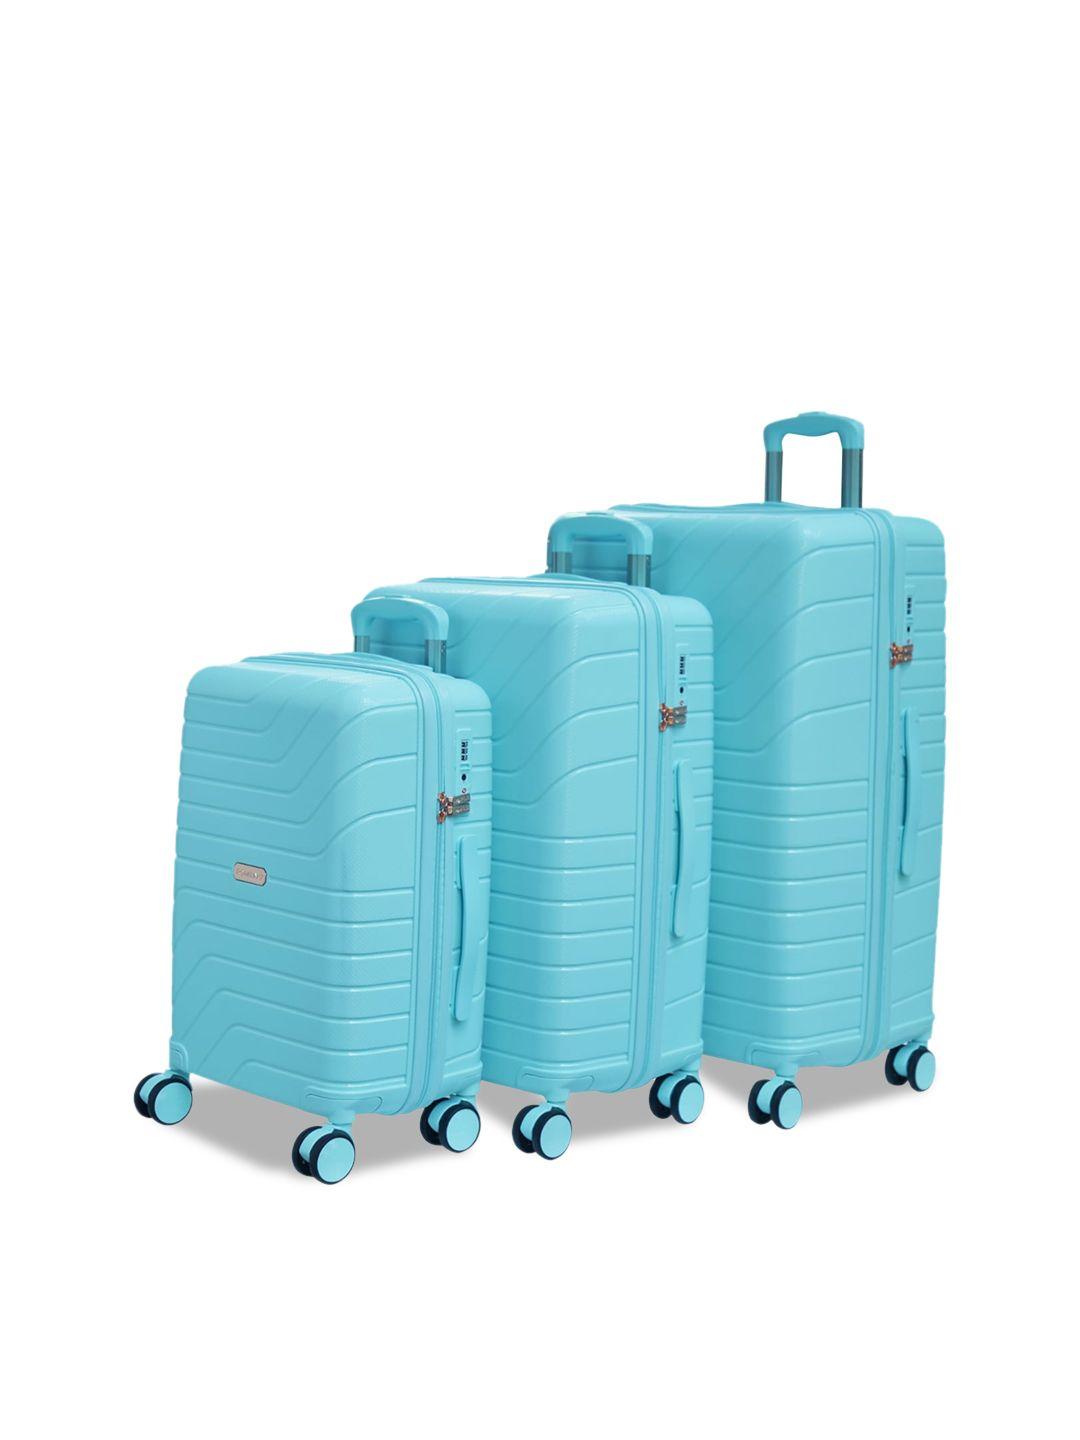 romeing tuscany set of 3 turquoise blue hard-sided trolley suitcases